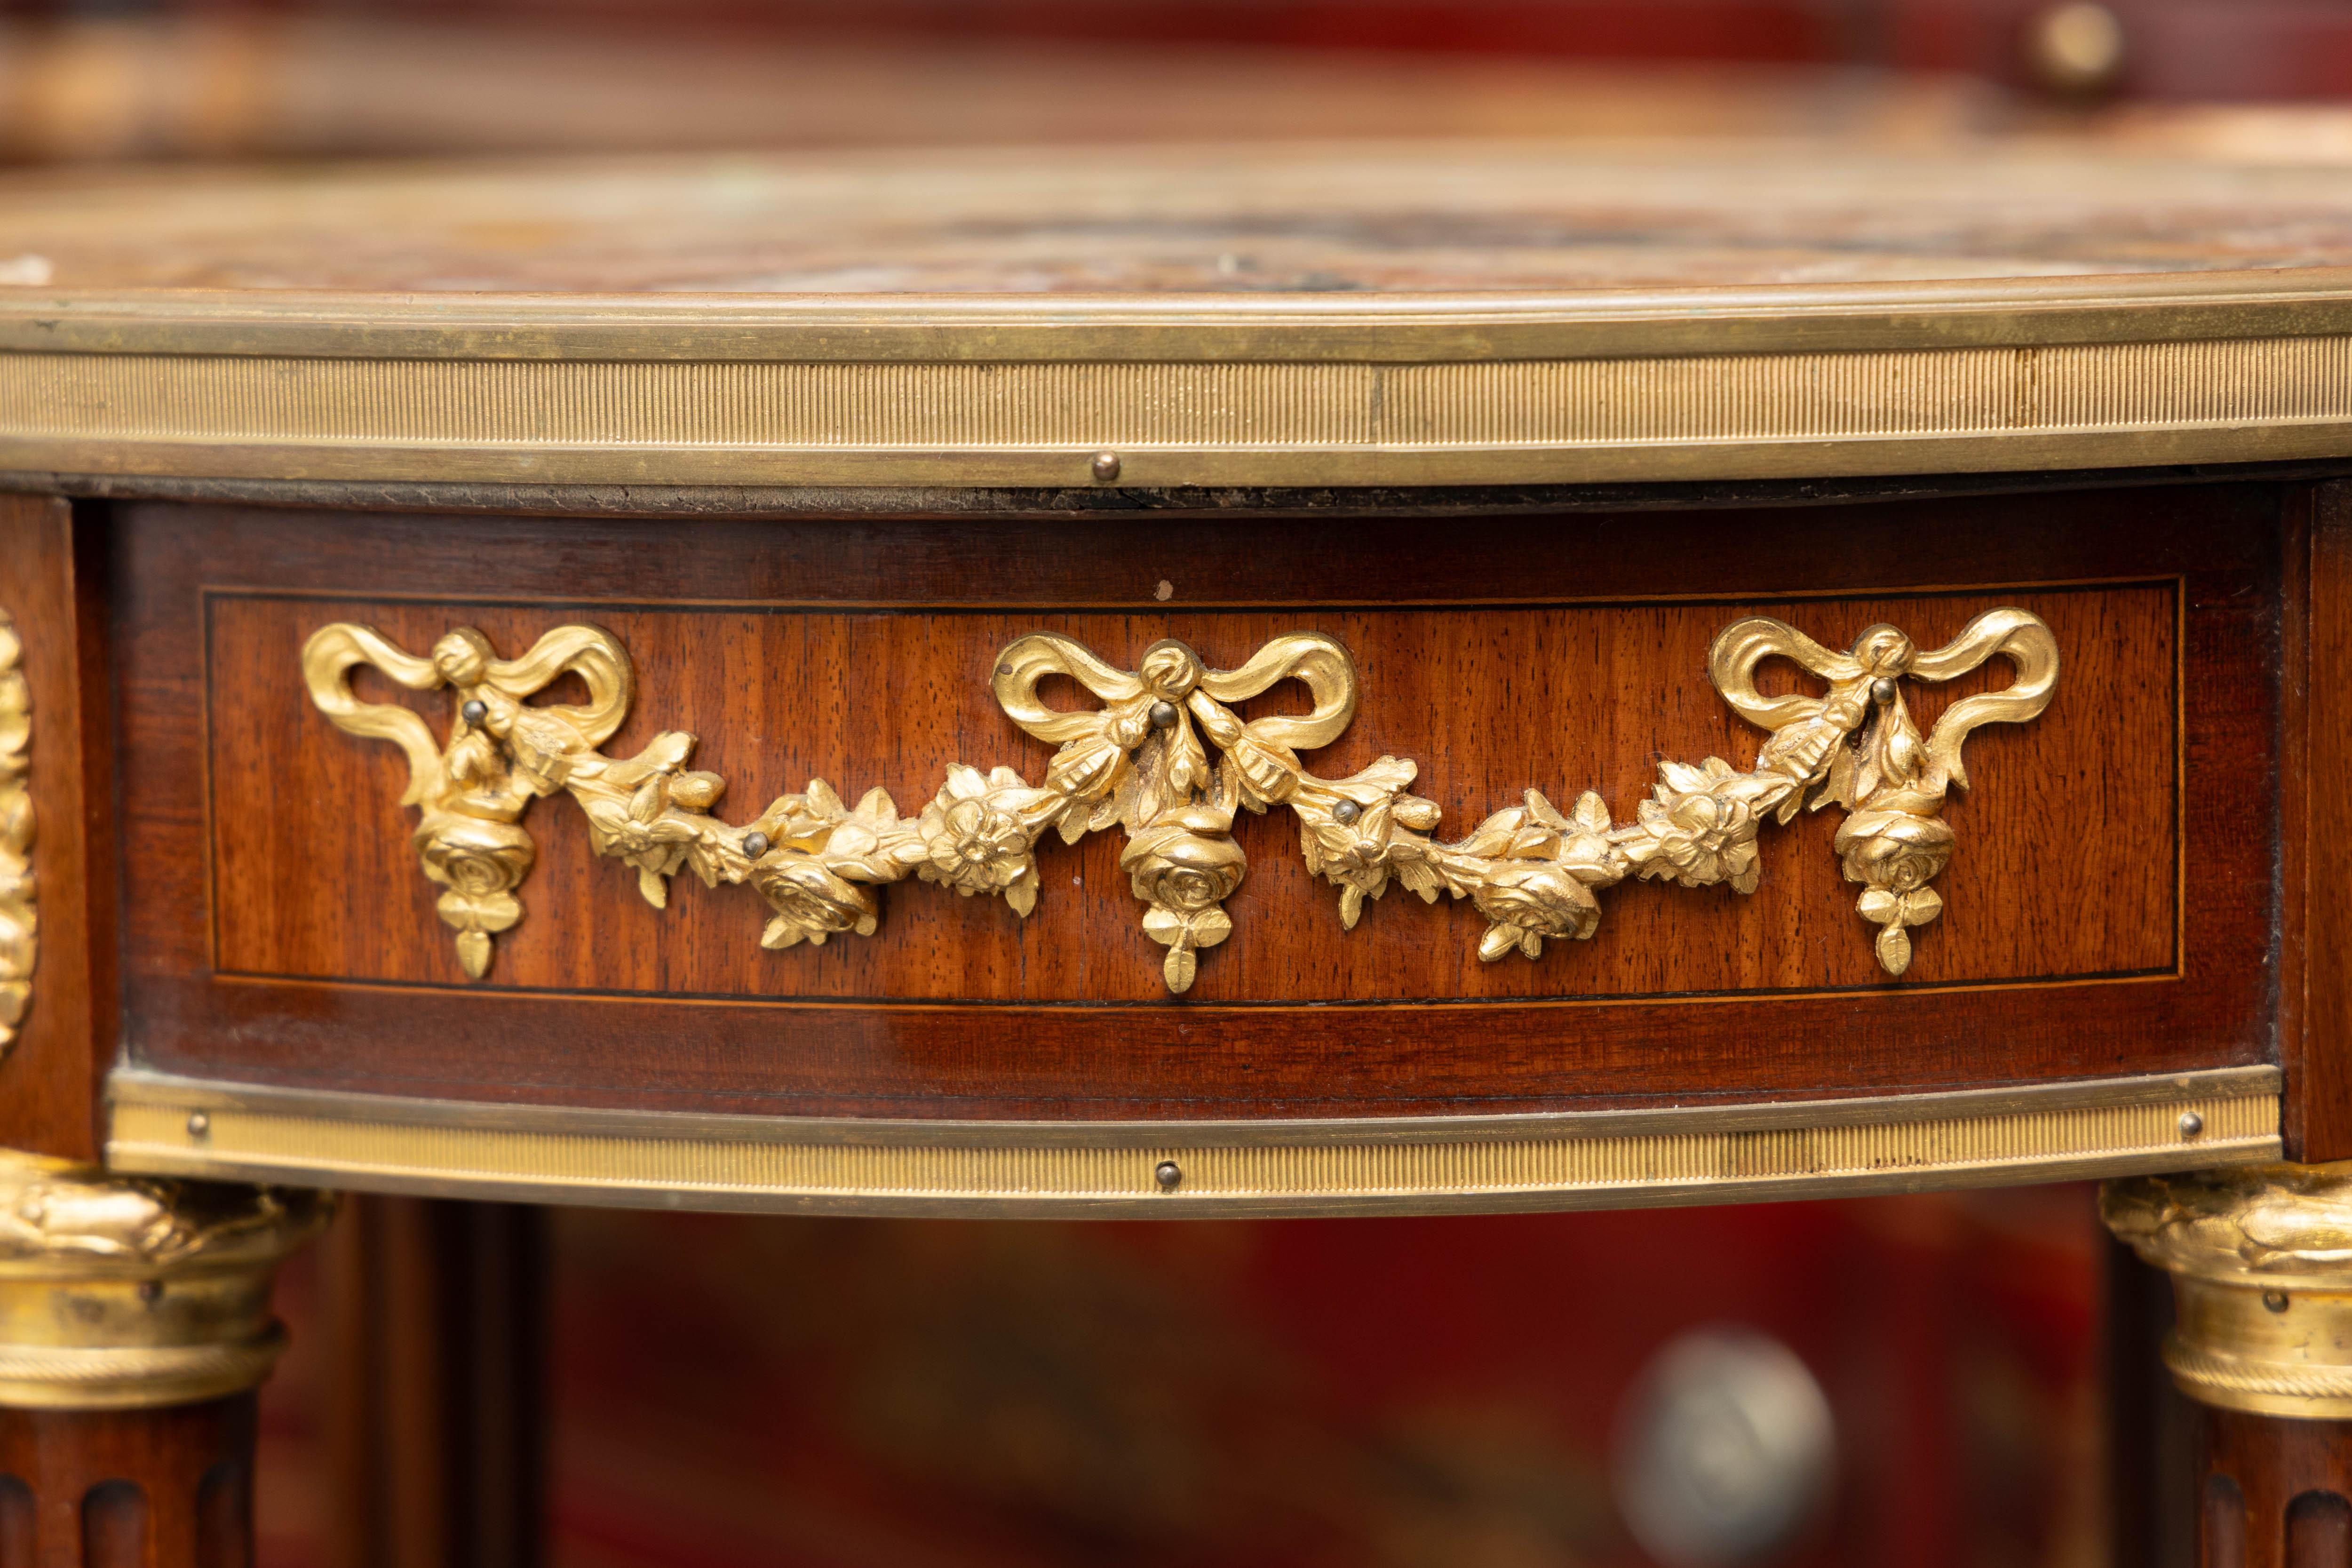 This is a sophisticated 19th century Louis XVI mahogany style end table. The oval Breccia marble top, with gilt bronze band is positioned over a deep frieze containing gilt bronze swags.  The entire top is supported by straight tapering fluted legs